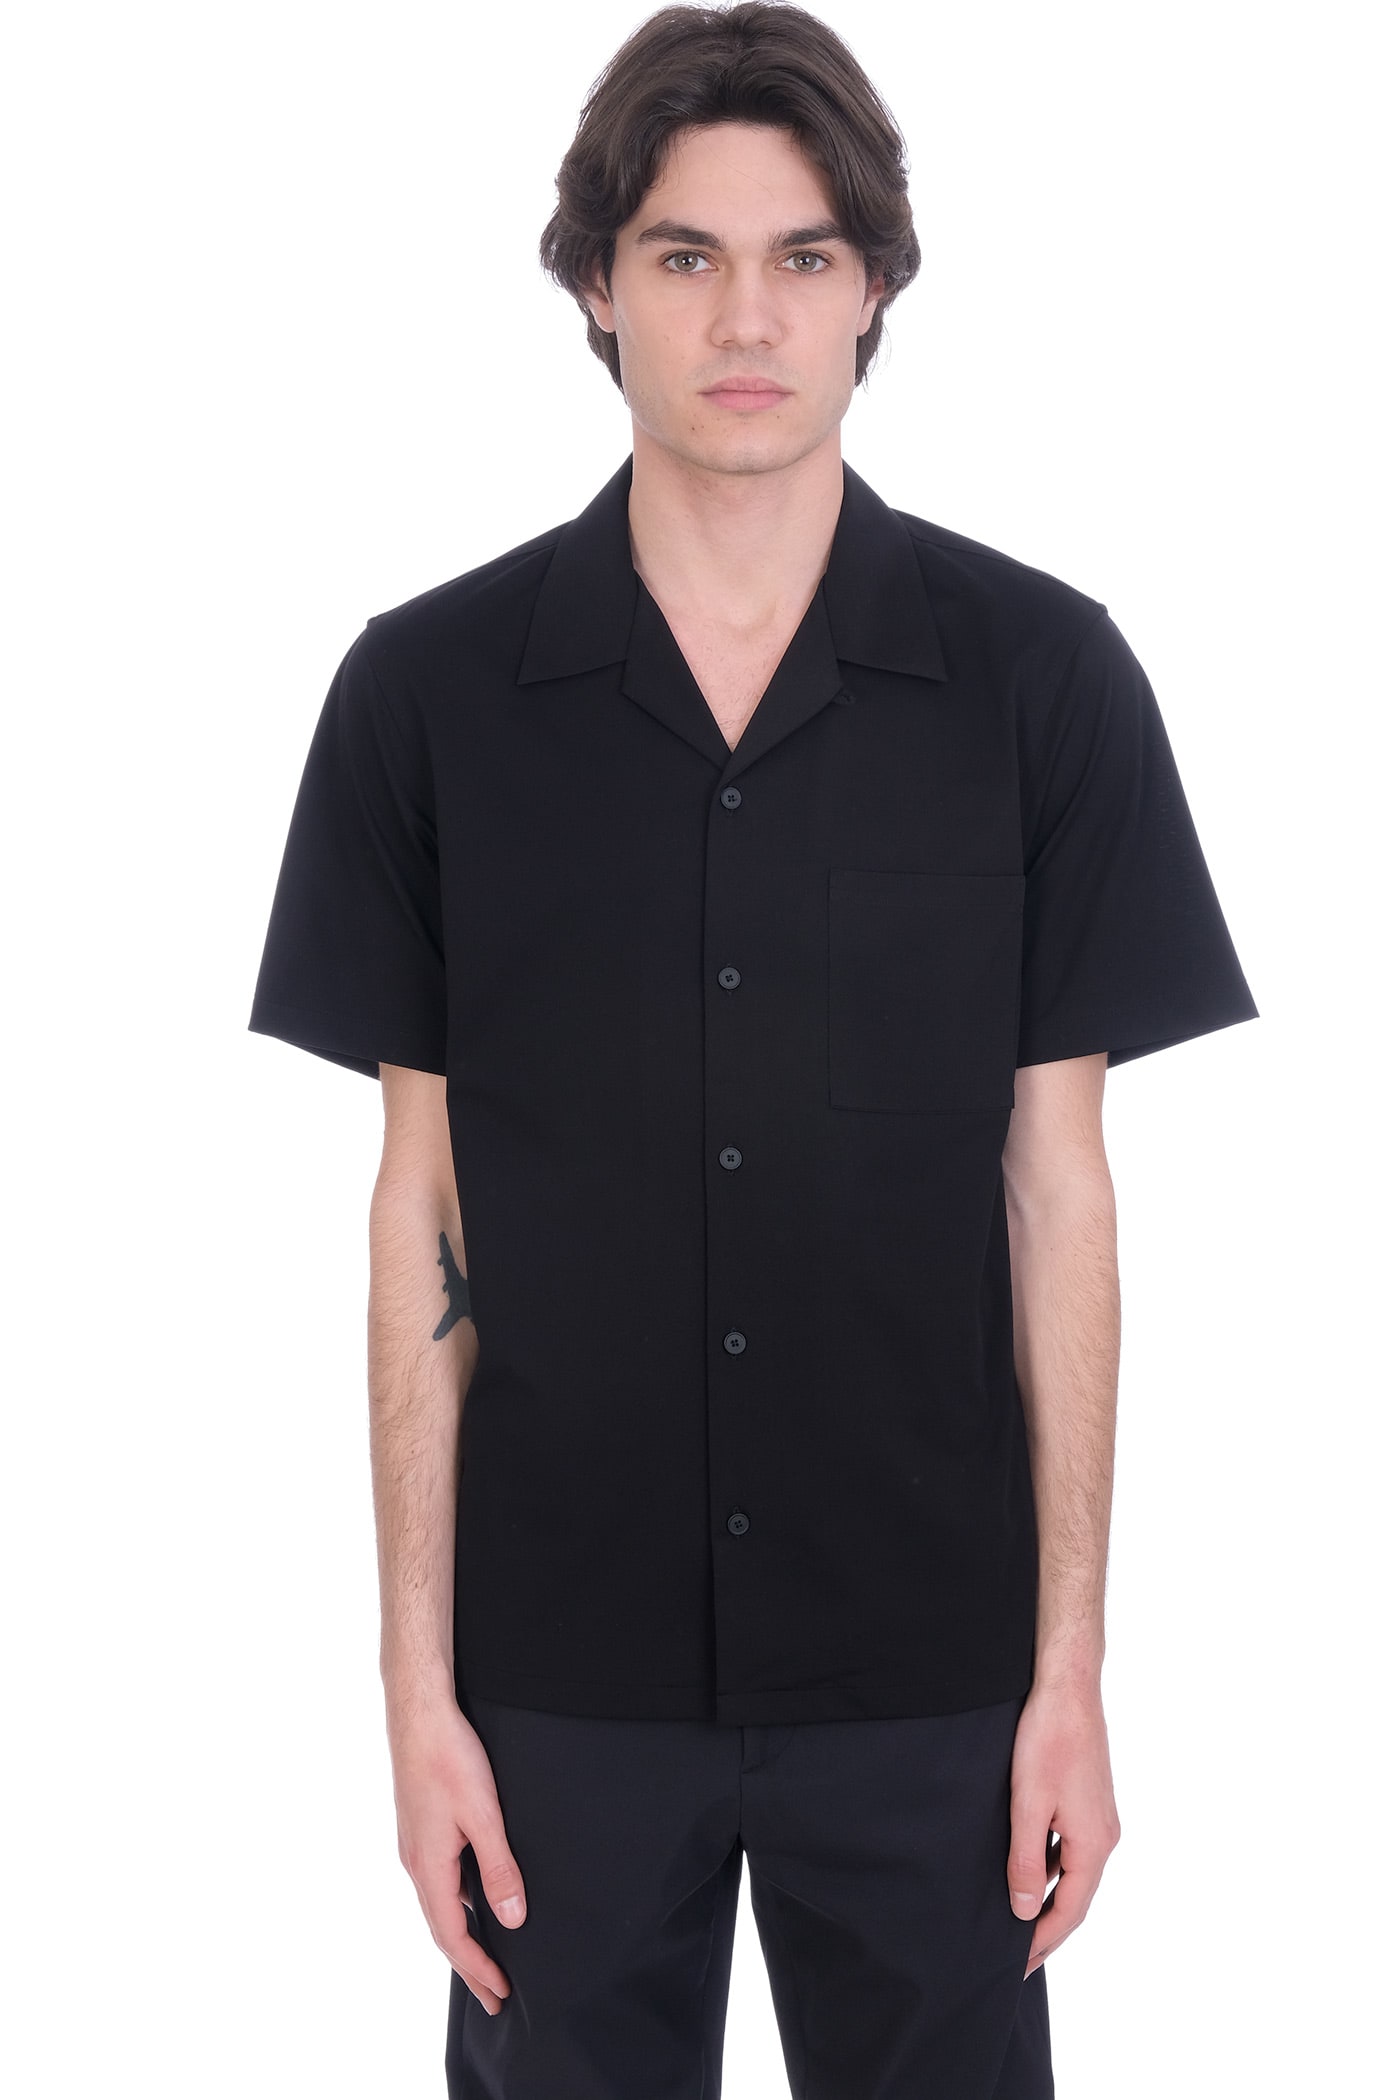 Theory Shirt In Black Cotton